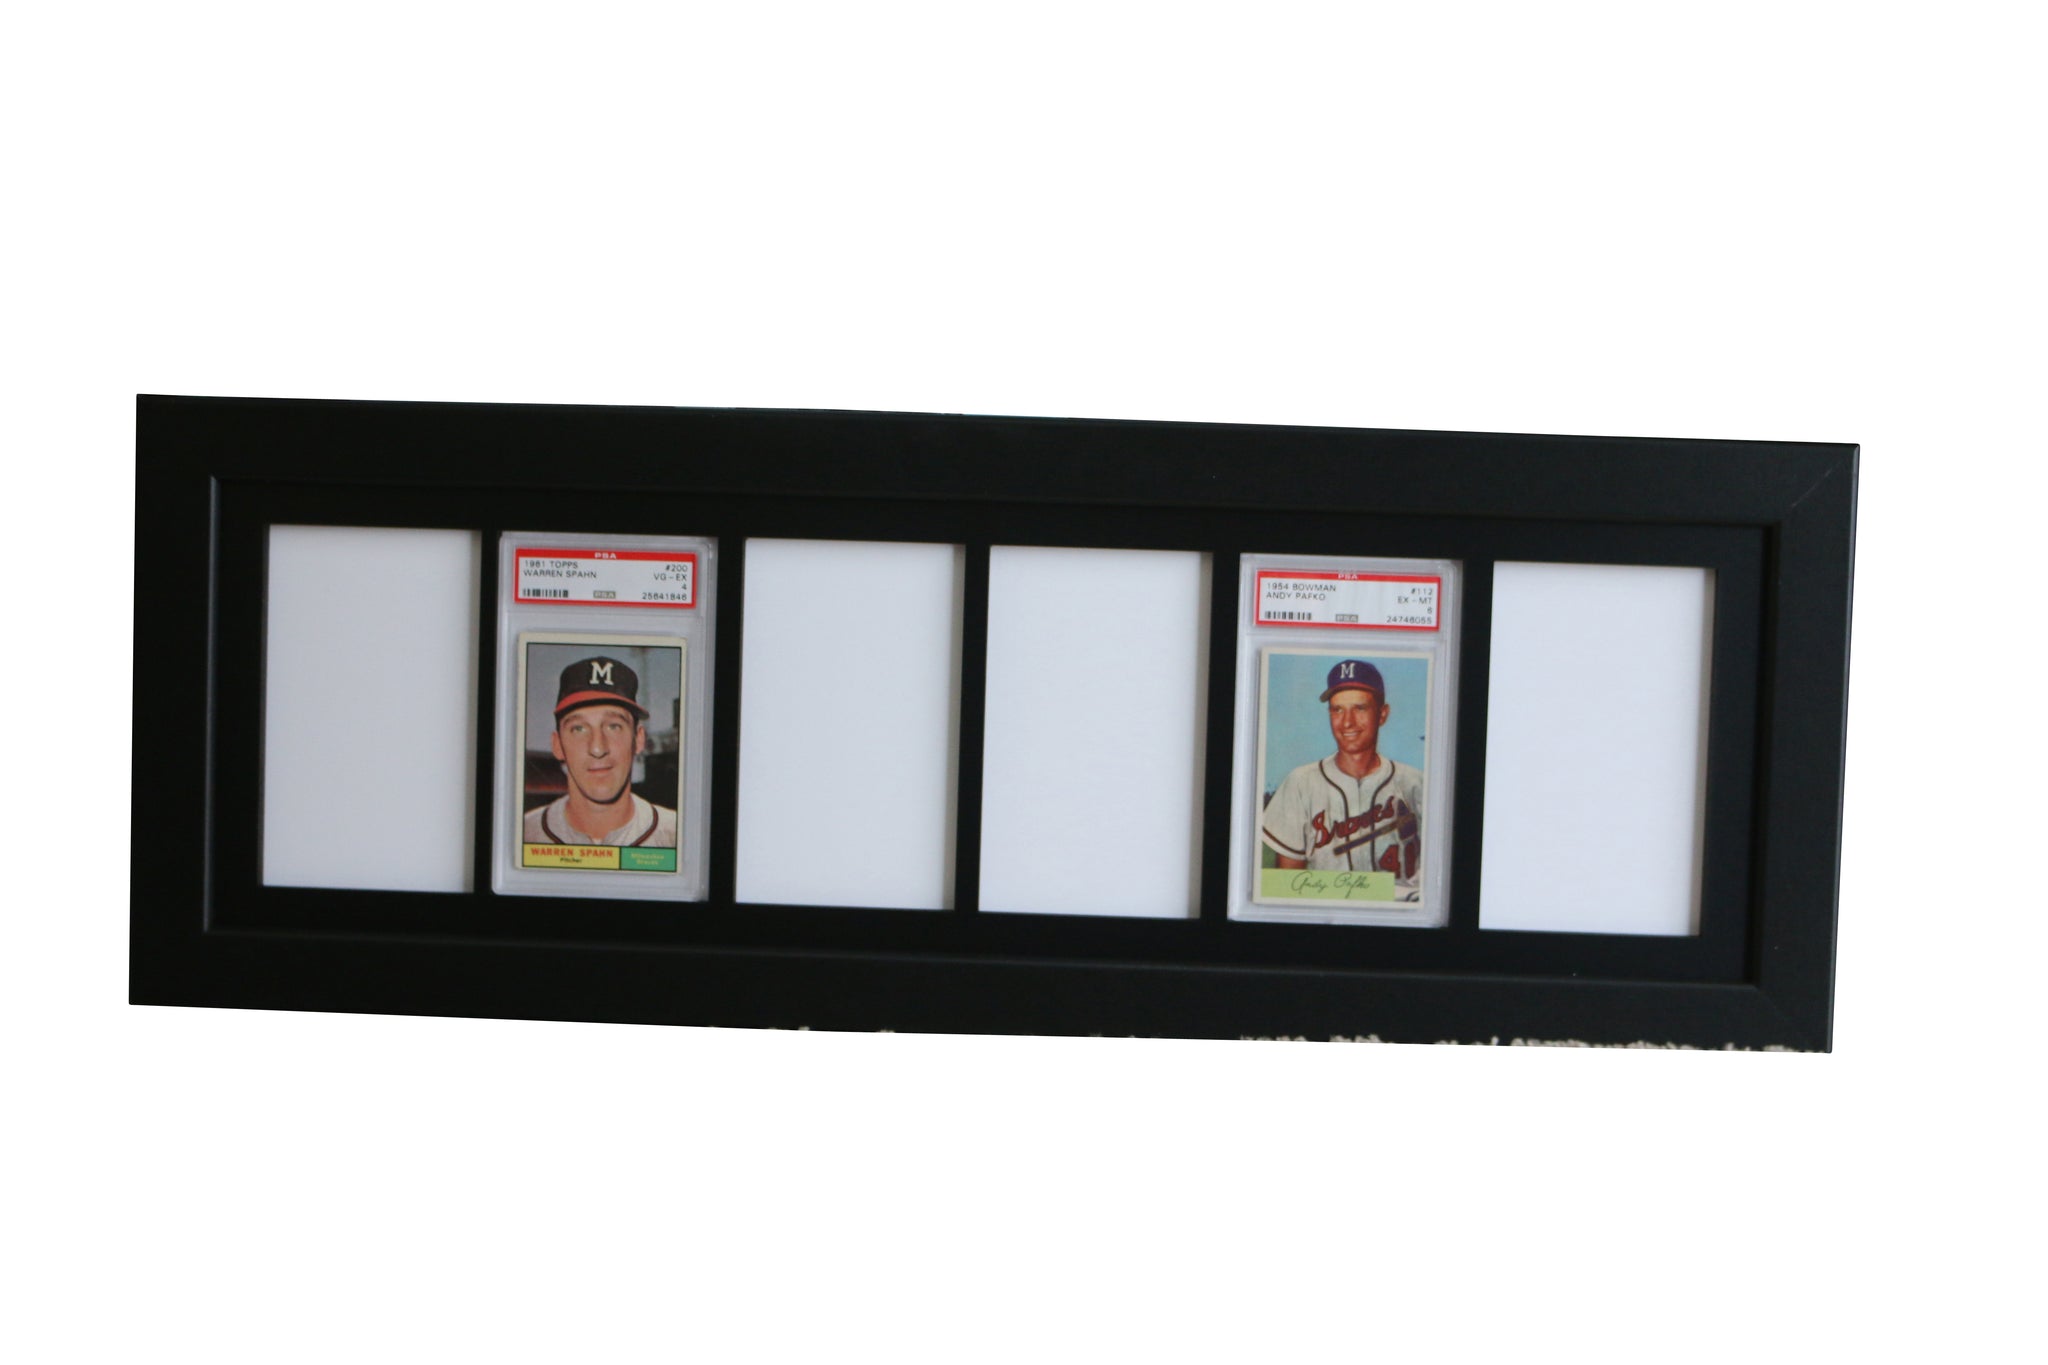 Framed Display for (6) PSA Graded Sports Cards or Pokemon Cards-NEW - Graded And Framed